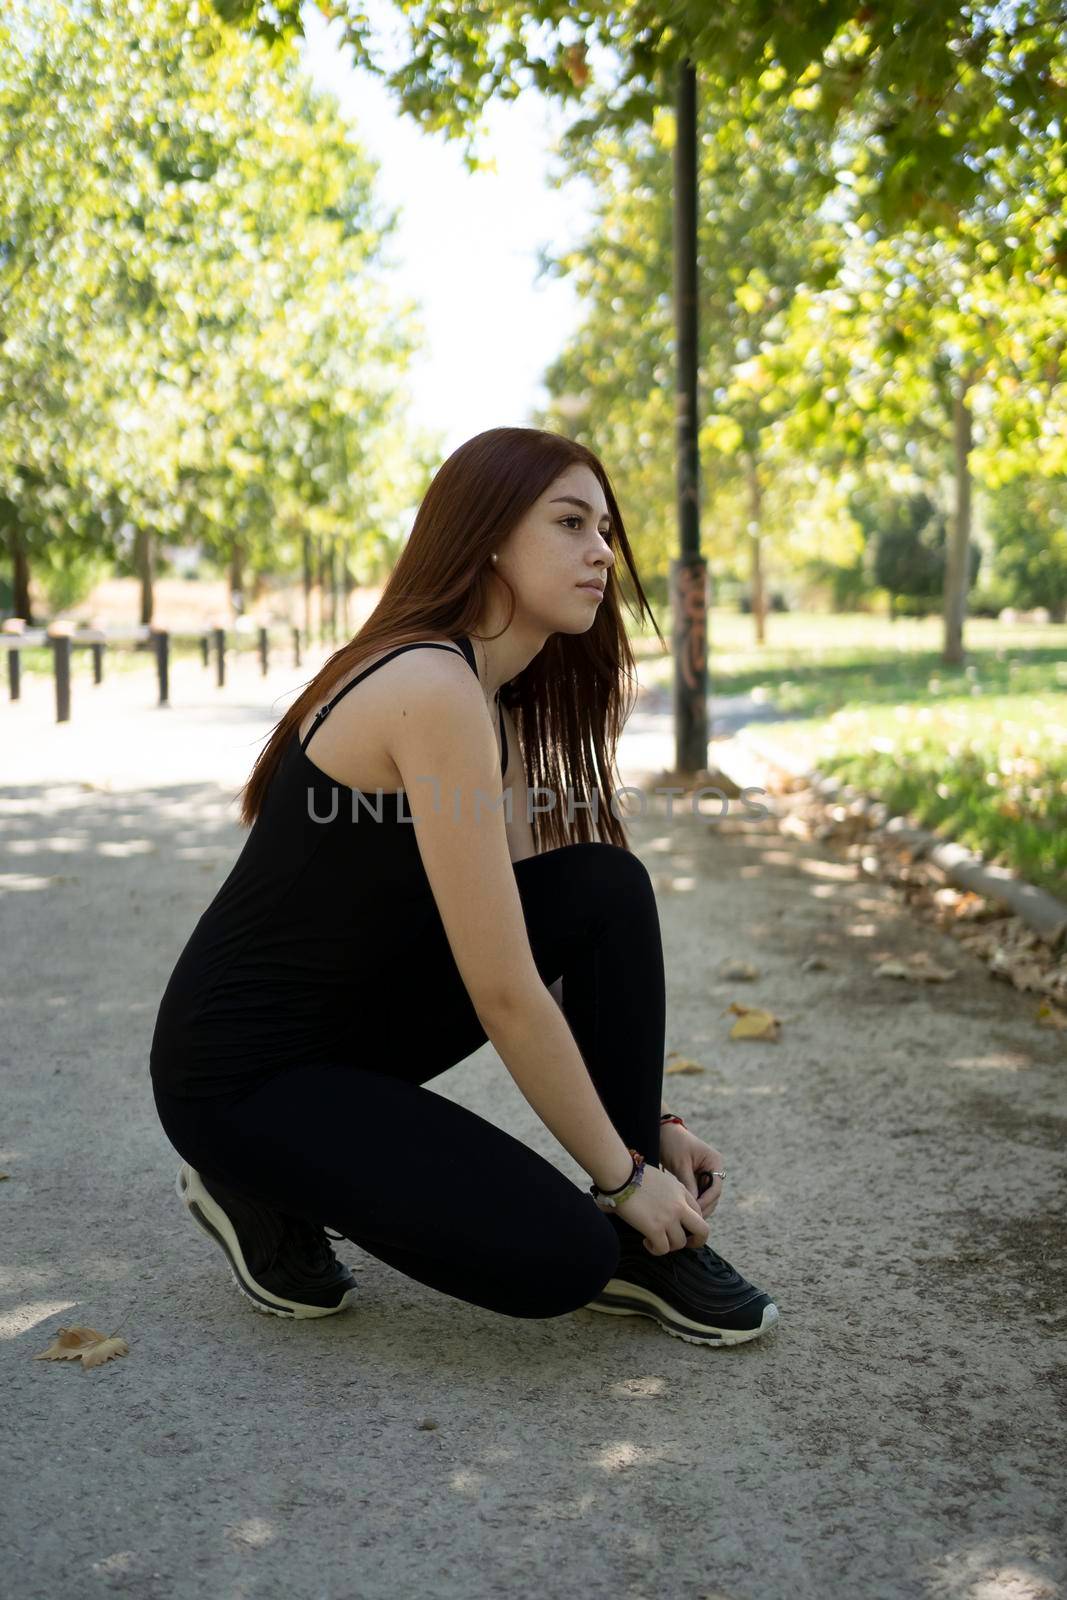 Young modern woman tying running shoes in urban park.stock photo